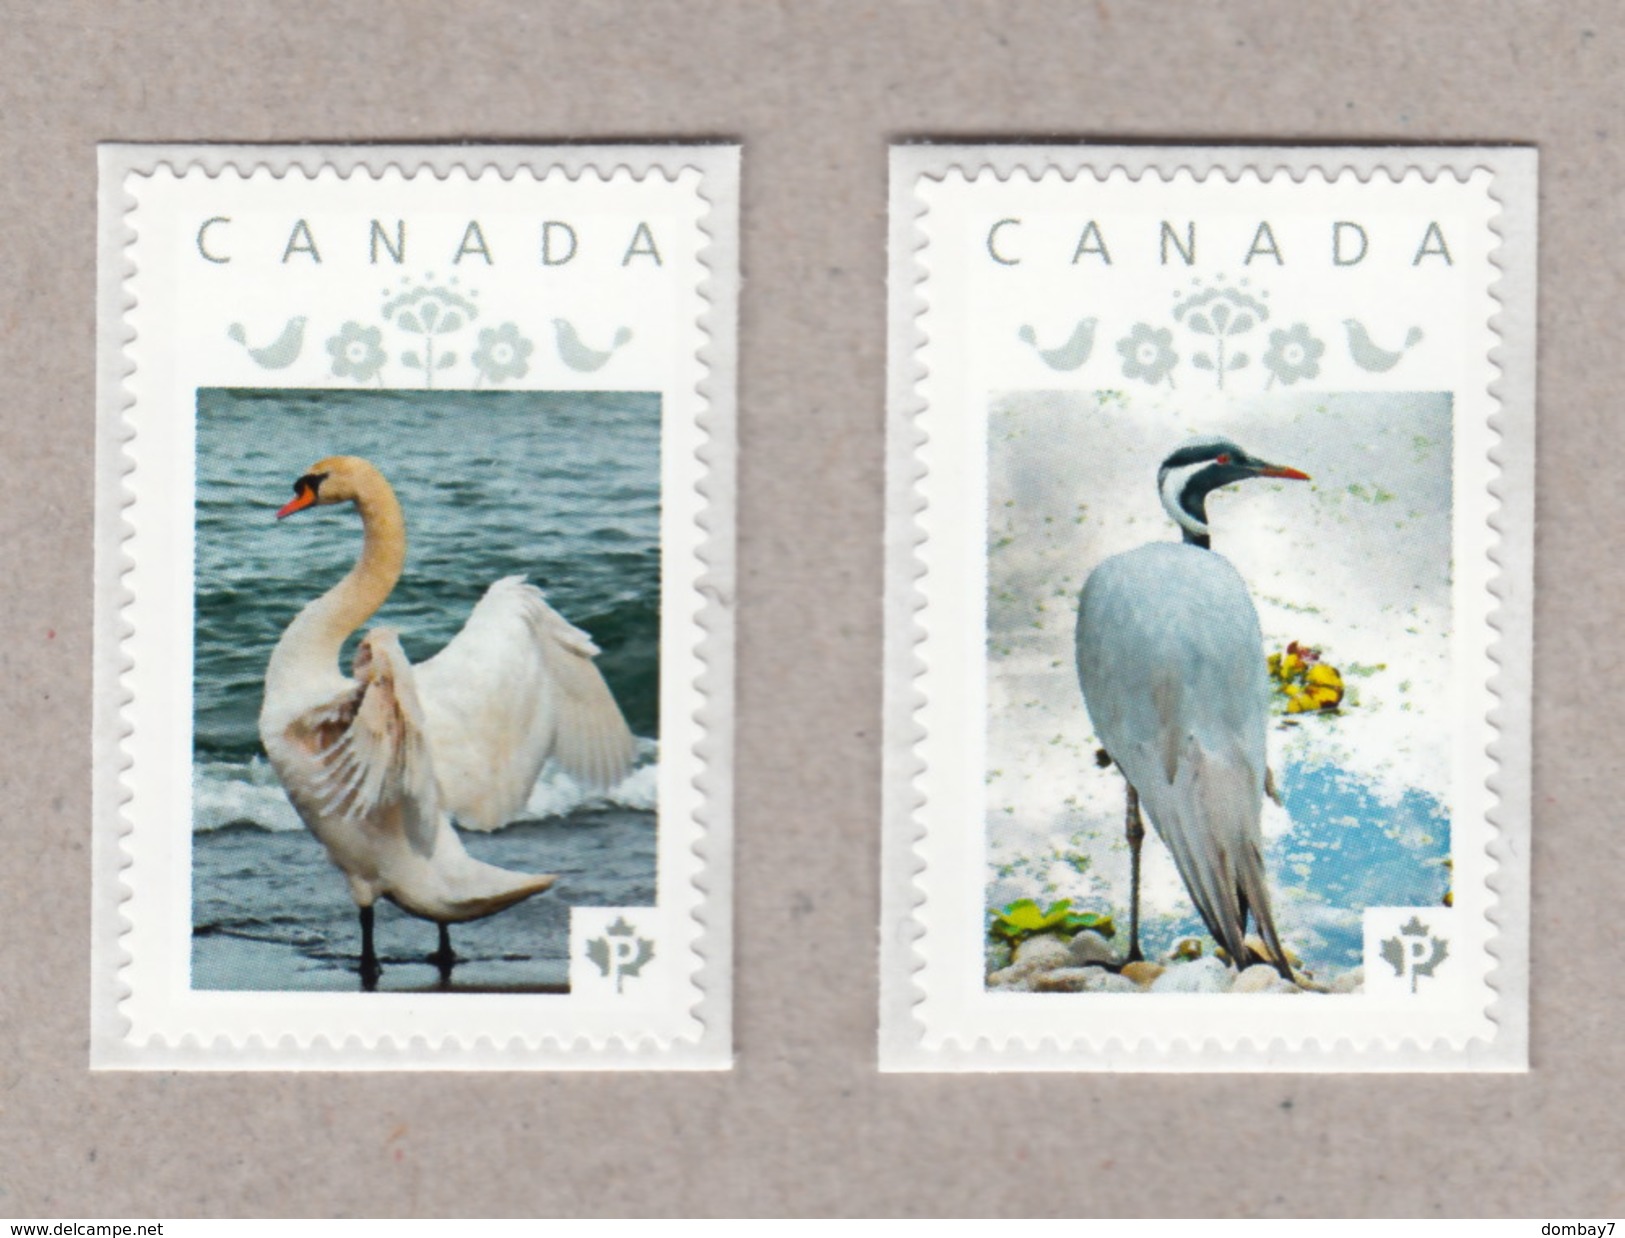 SWAN, CRANE Pair Of Unique Personalized Postage Stamps MNH Canada 2017 [p17-01wb - Cygnes